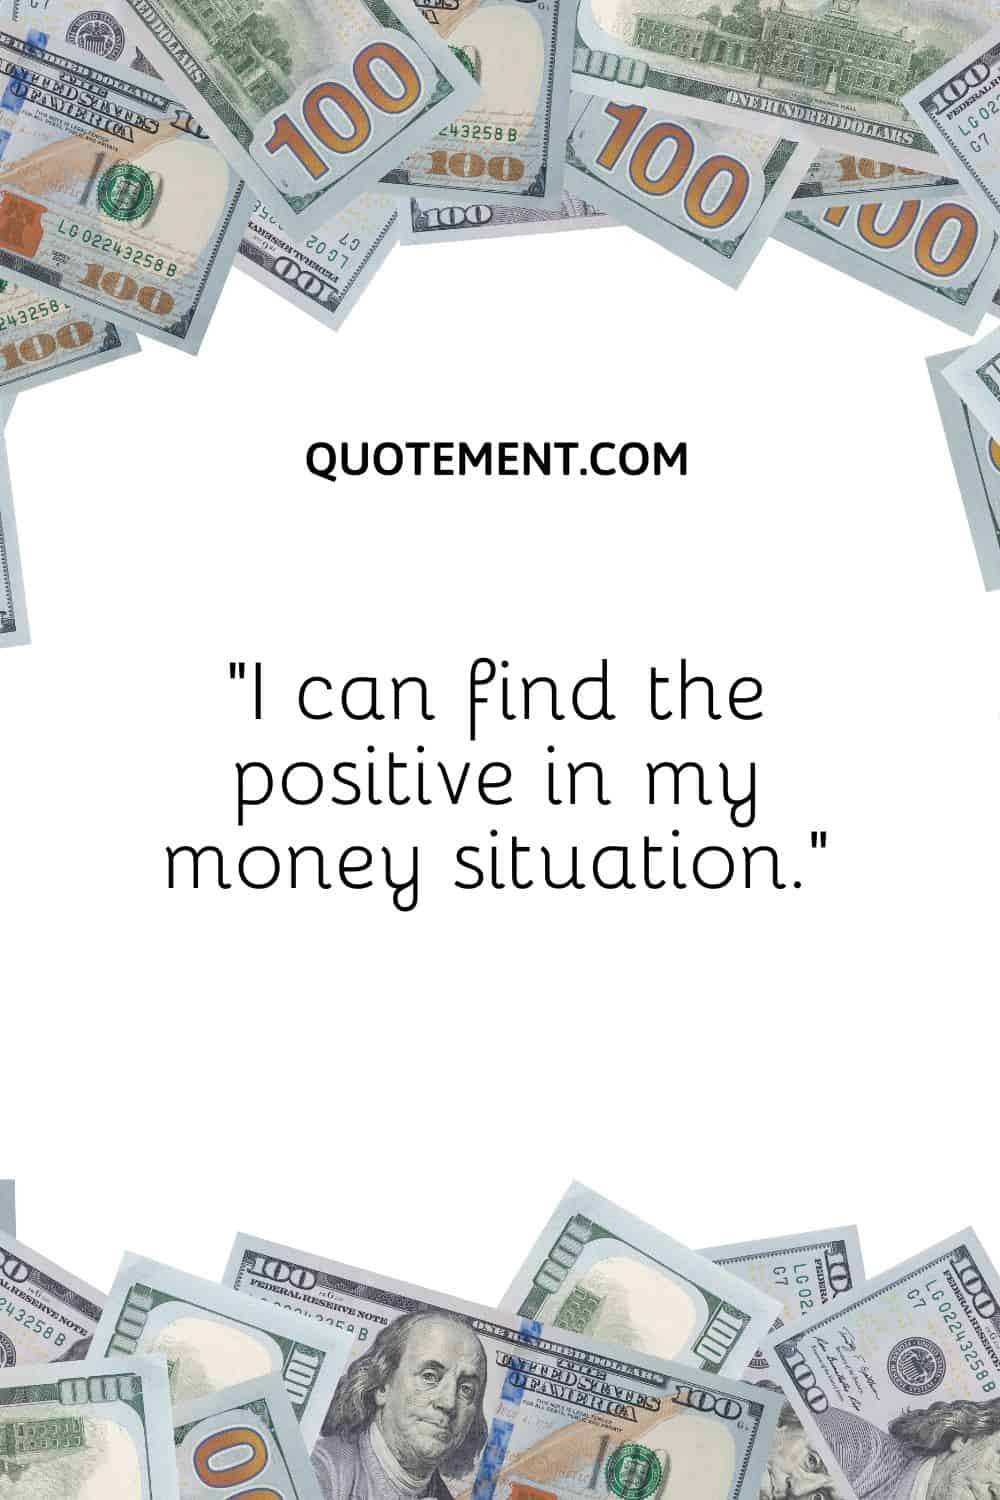 “I can find the positive in my money situation.”